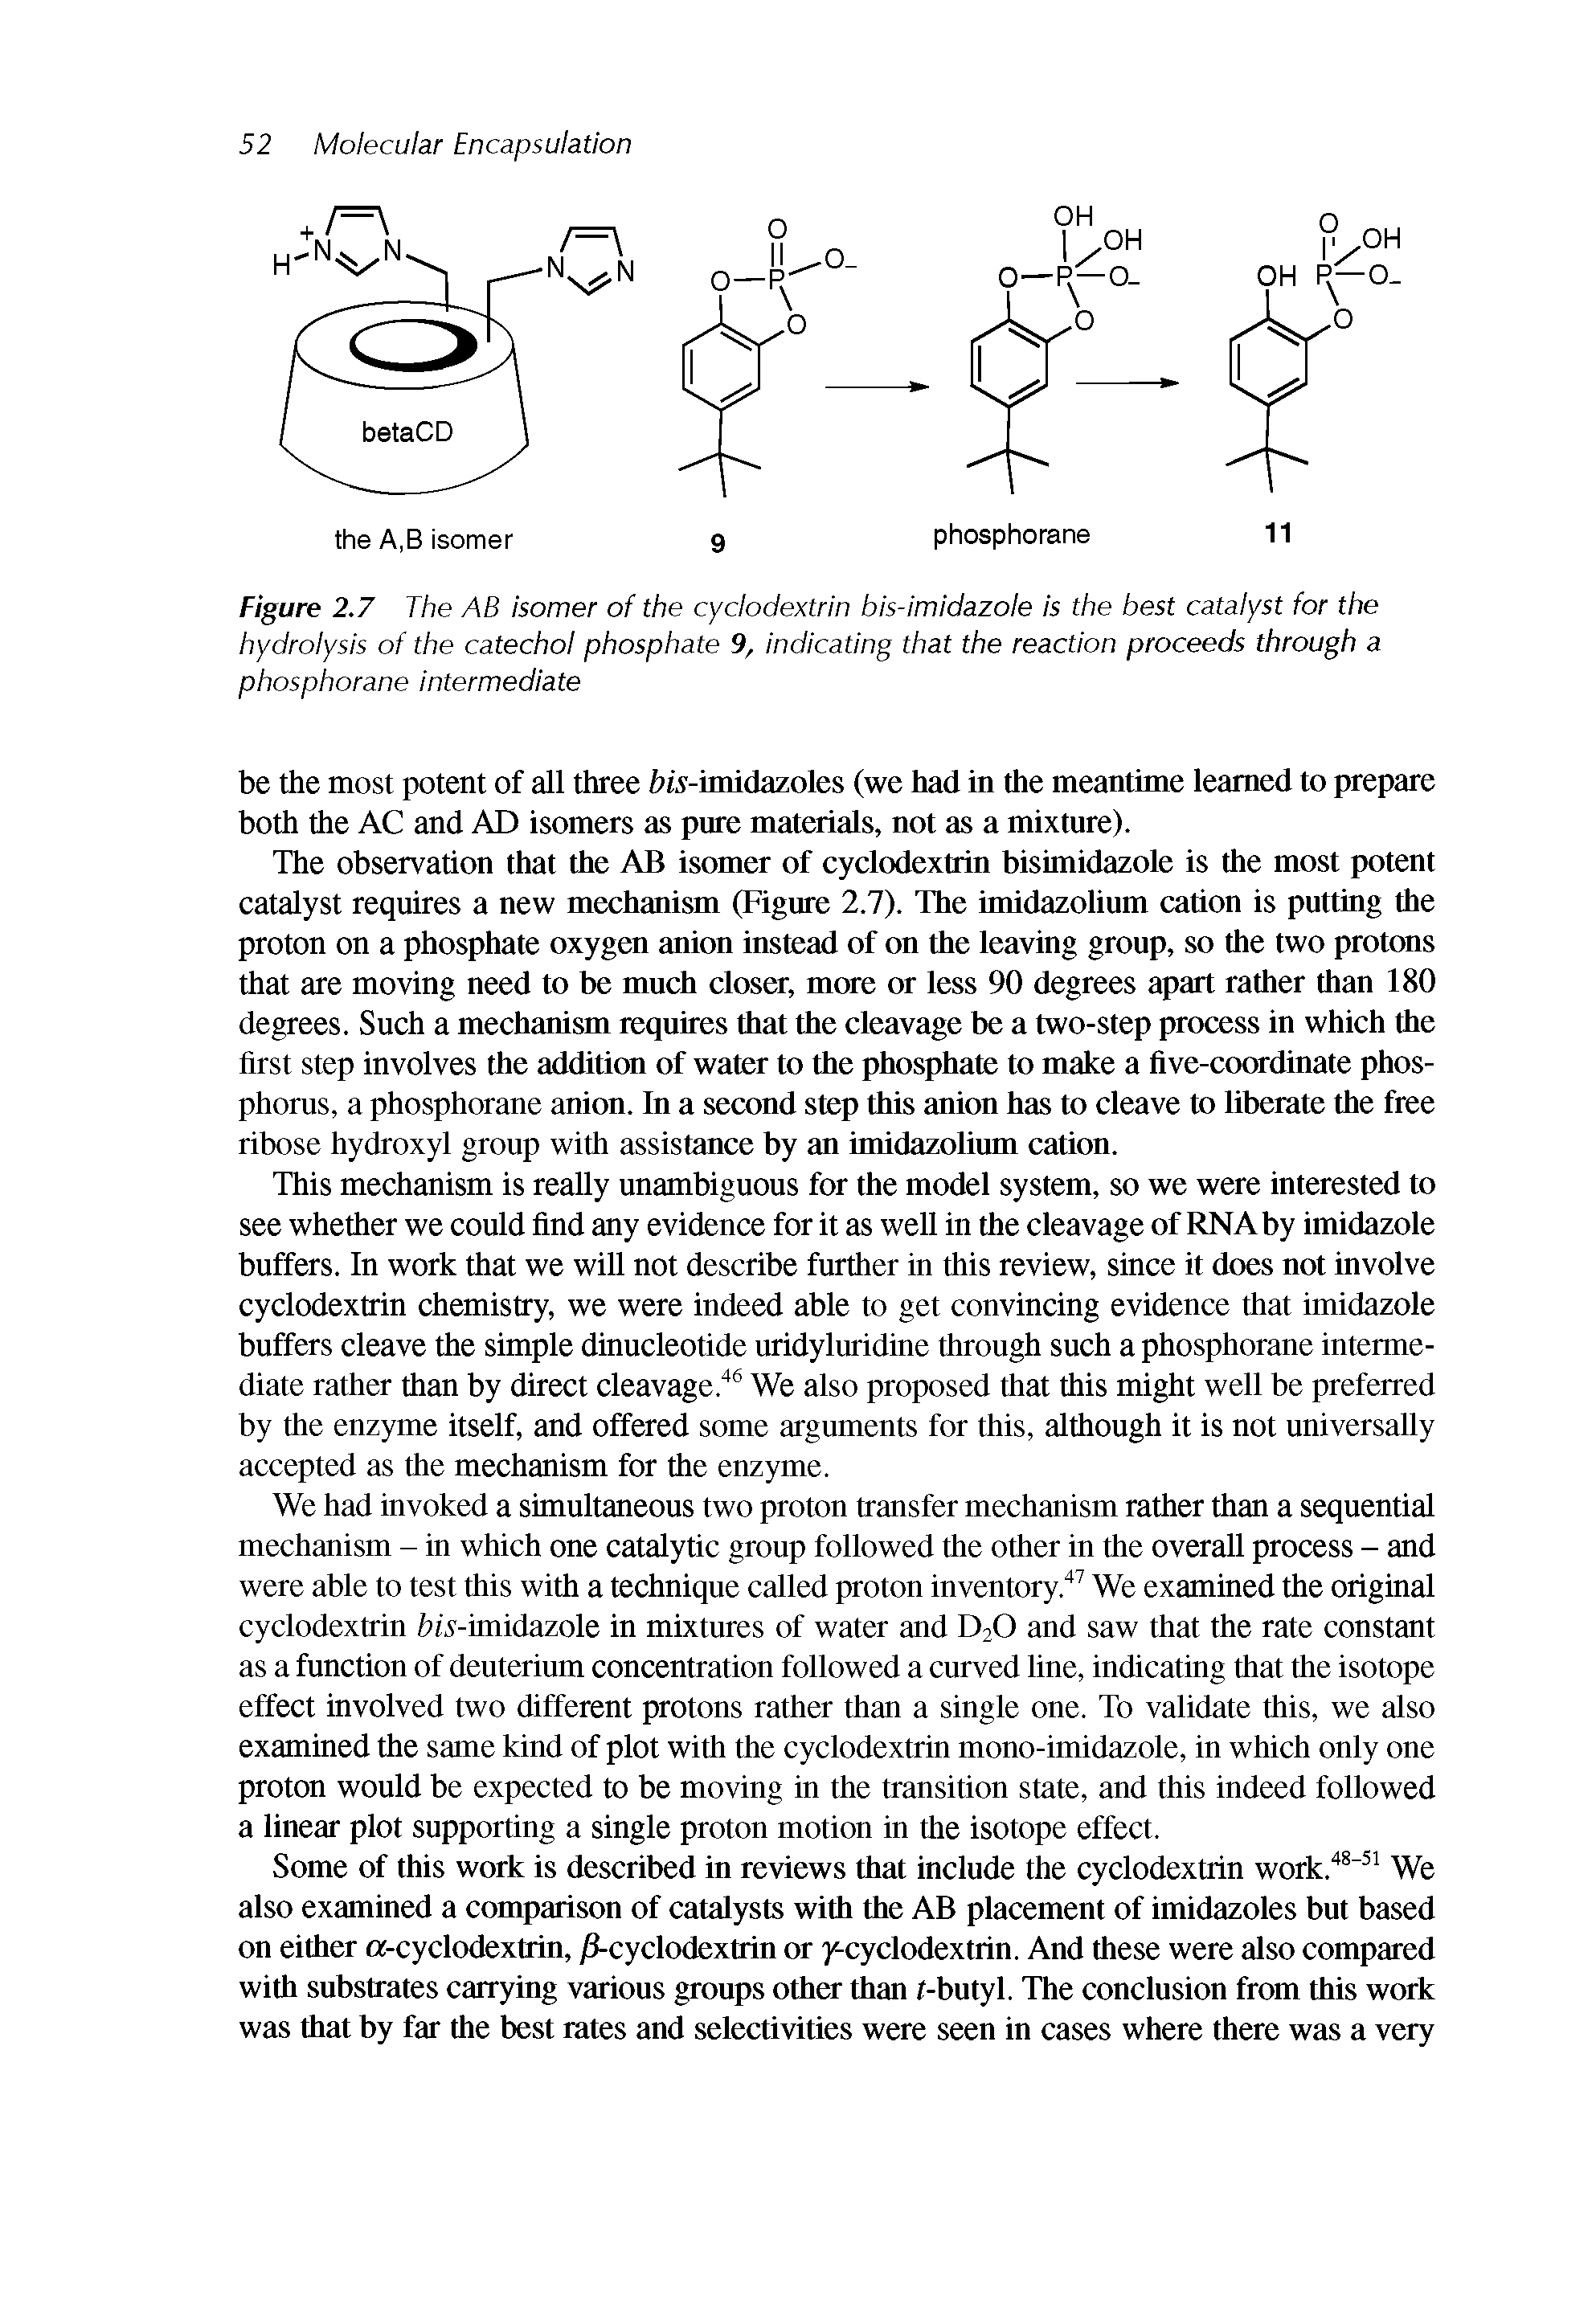 Figure 2.7 The AB Isomer of the cyclodextrin bis-imidazole Is the best catalyst for the hydrolysis of the catechol phosphate 9, indicating that the reaction proceeds through a phosphorane intermediate...